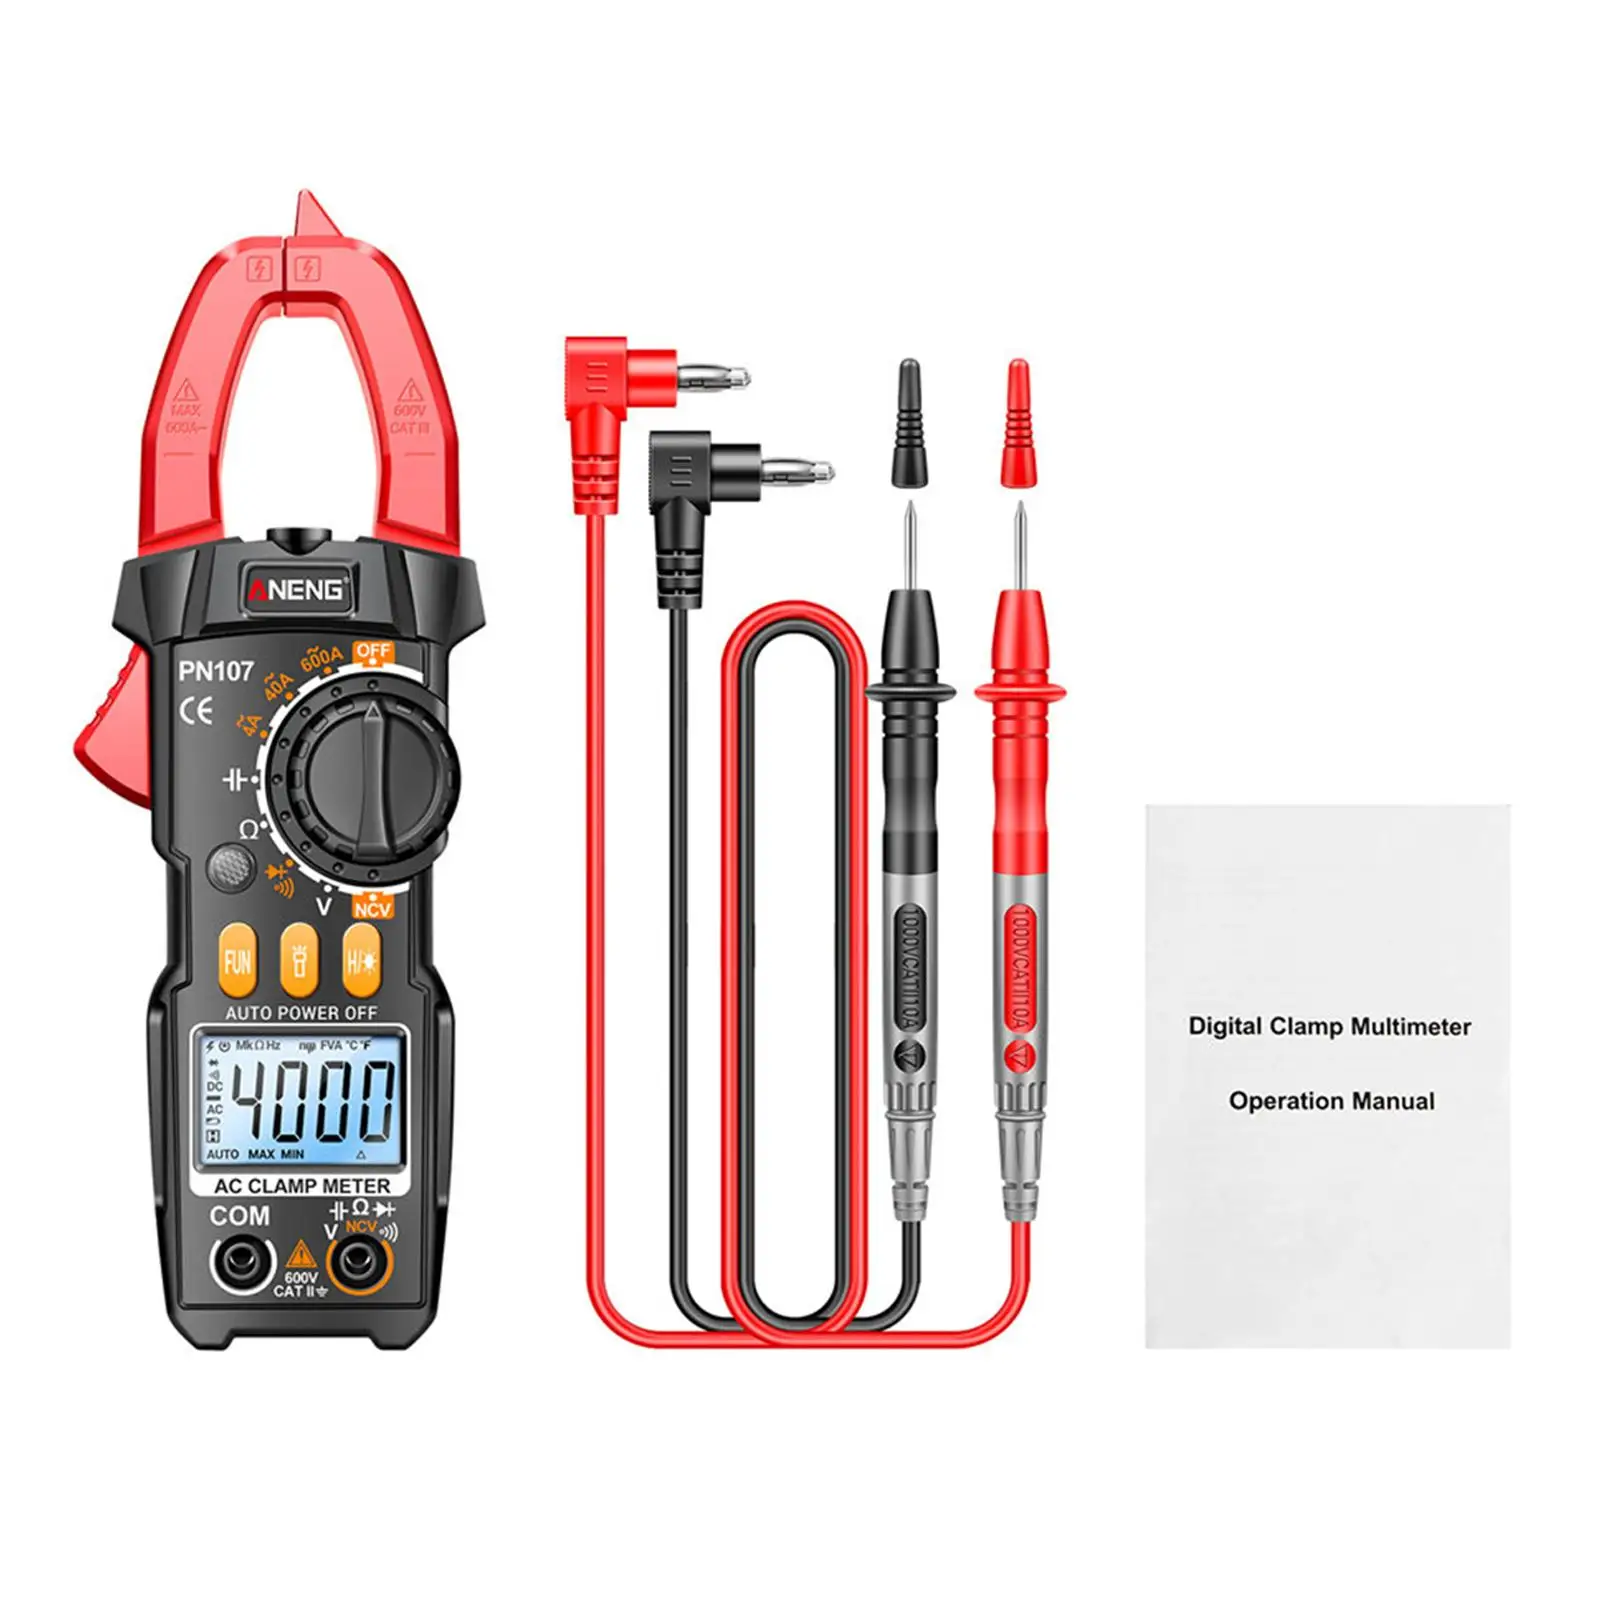 Digital Clamp Meter Portable Tool for Automotive Troubleshooting Batteries